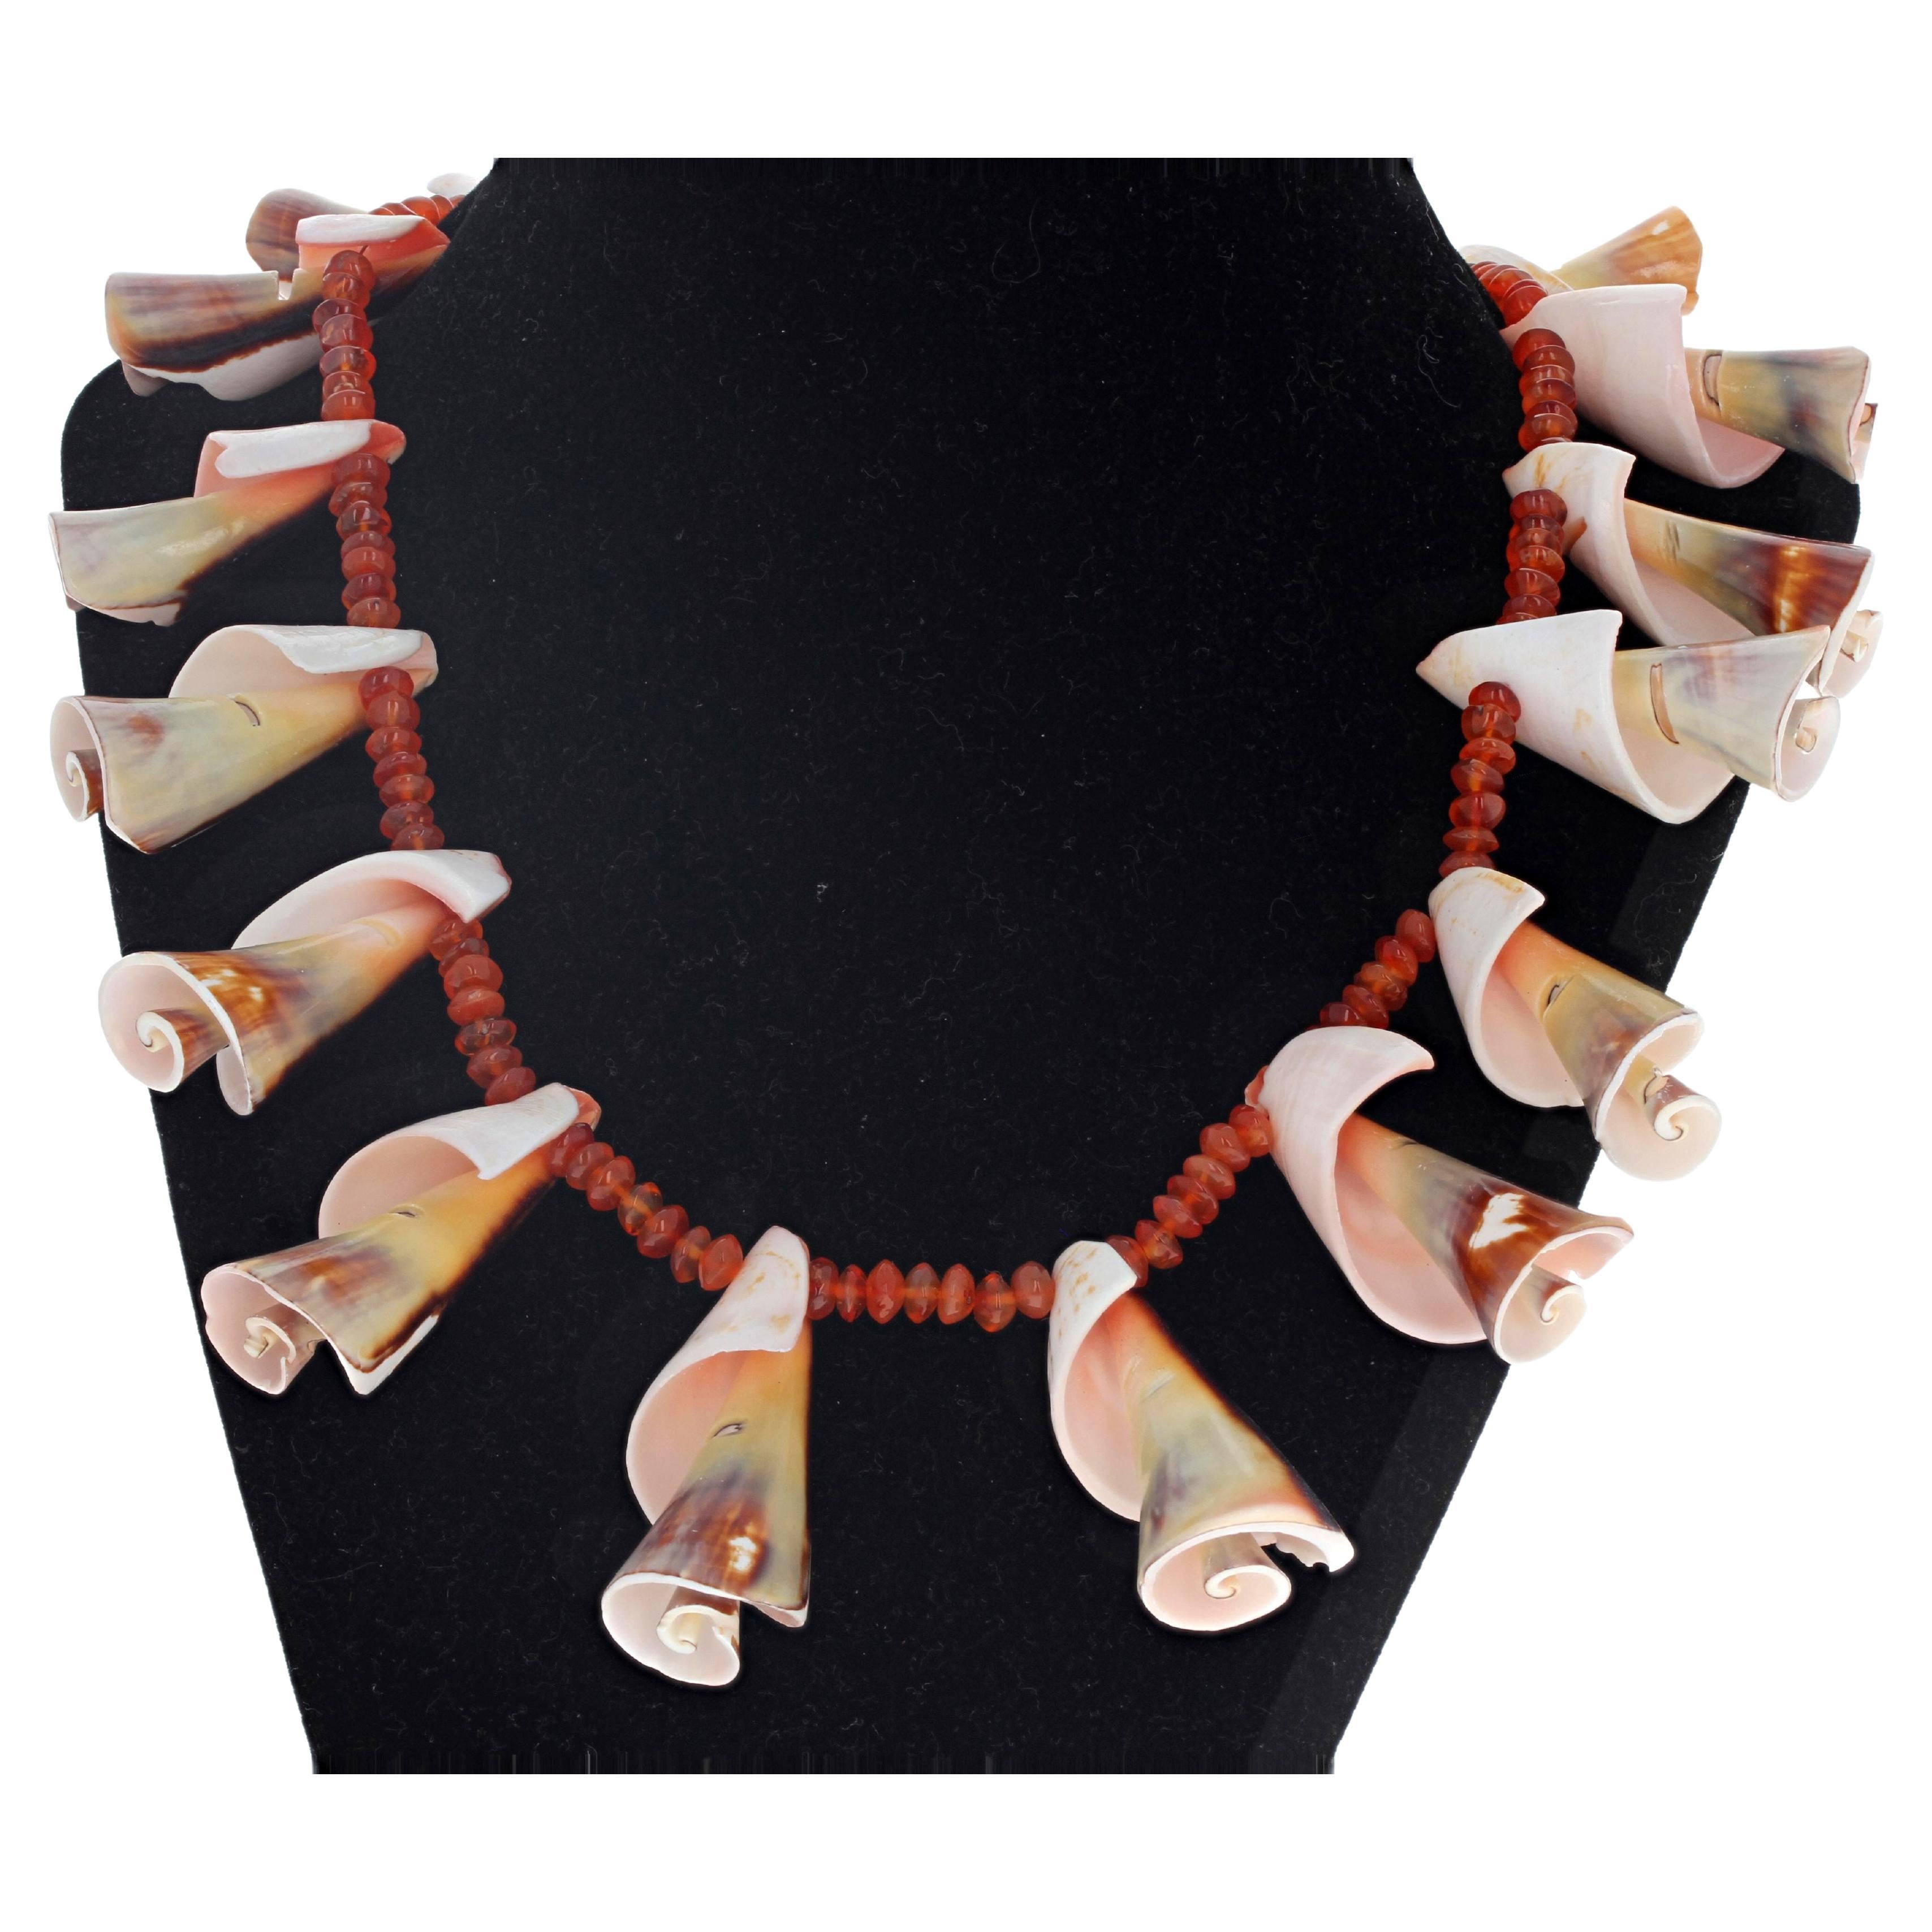 AJD Dramatic Fun Natural Spinelle Shells & Natural Carnelian Gemstones Necklace